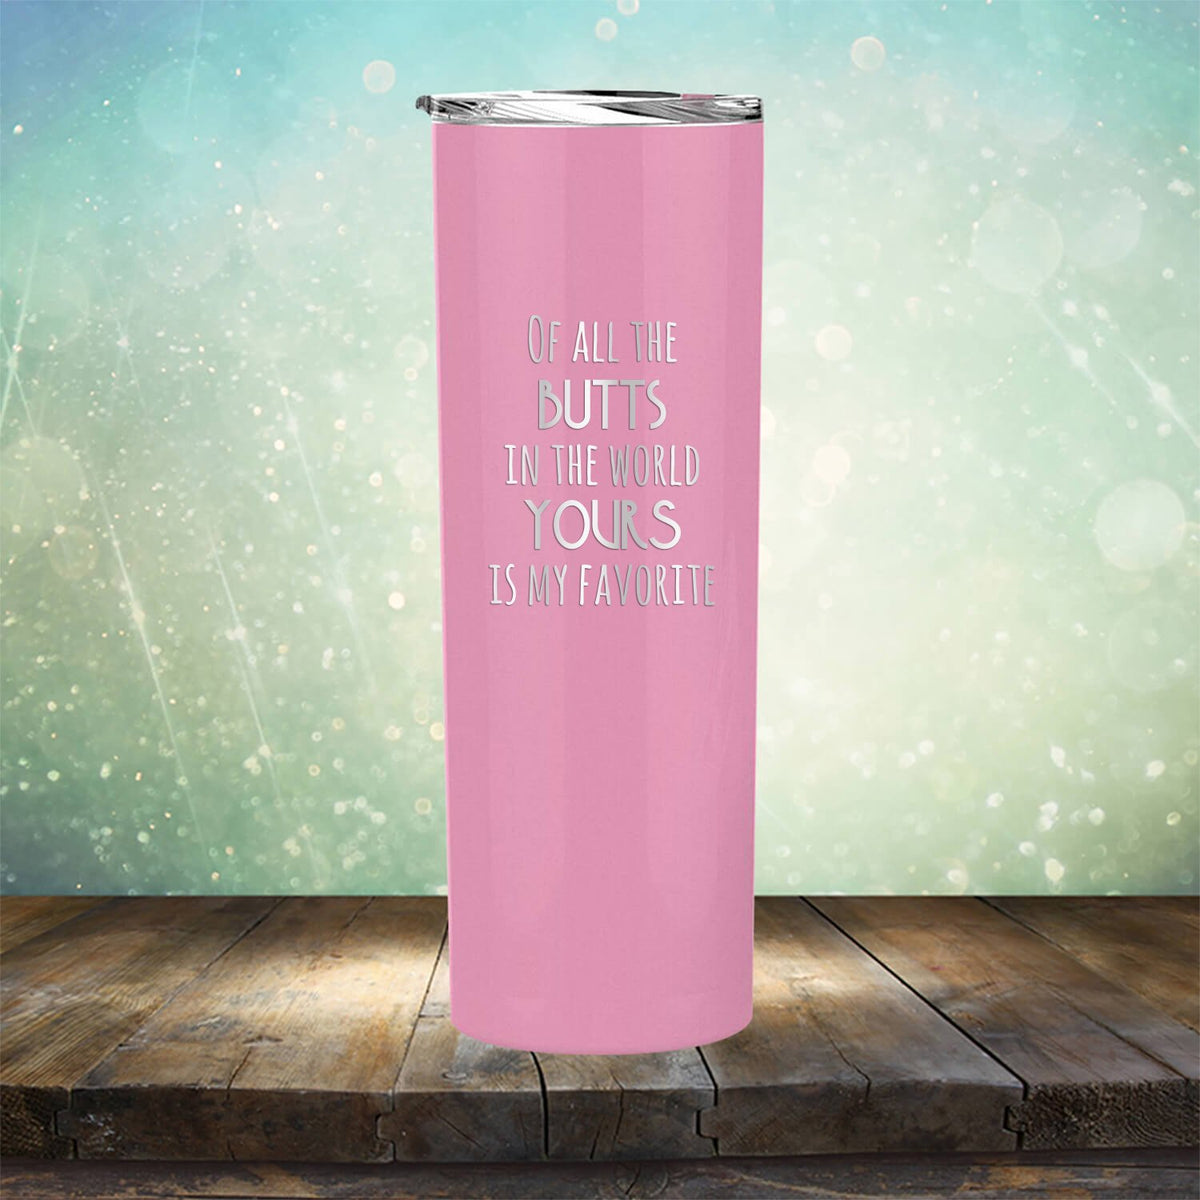 Off All the Butts in the World Yours is My Favorite - Laser Etched Tumbler Mug